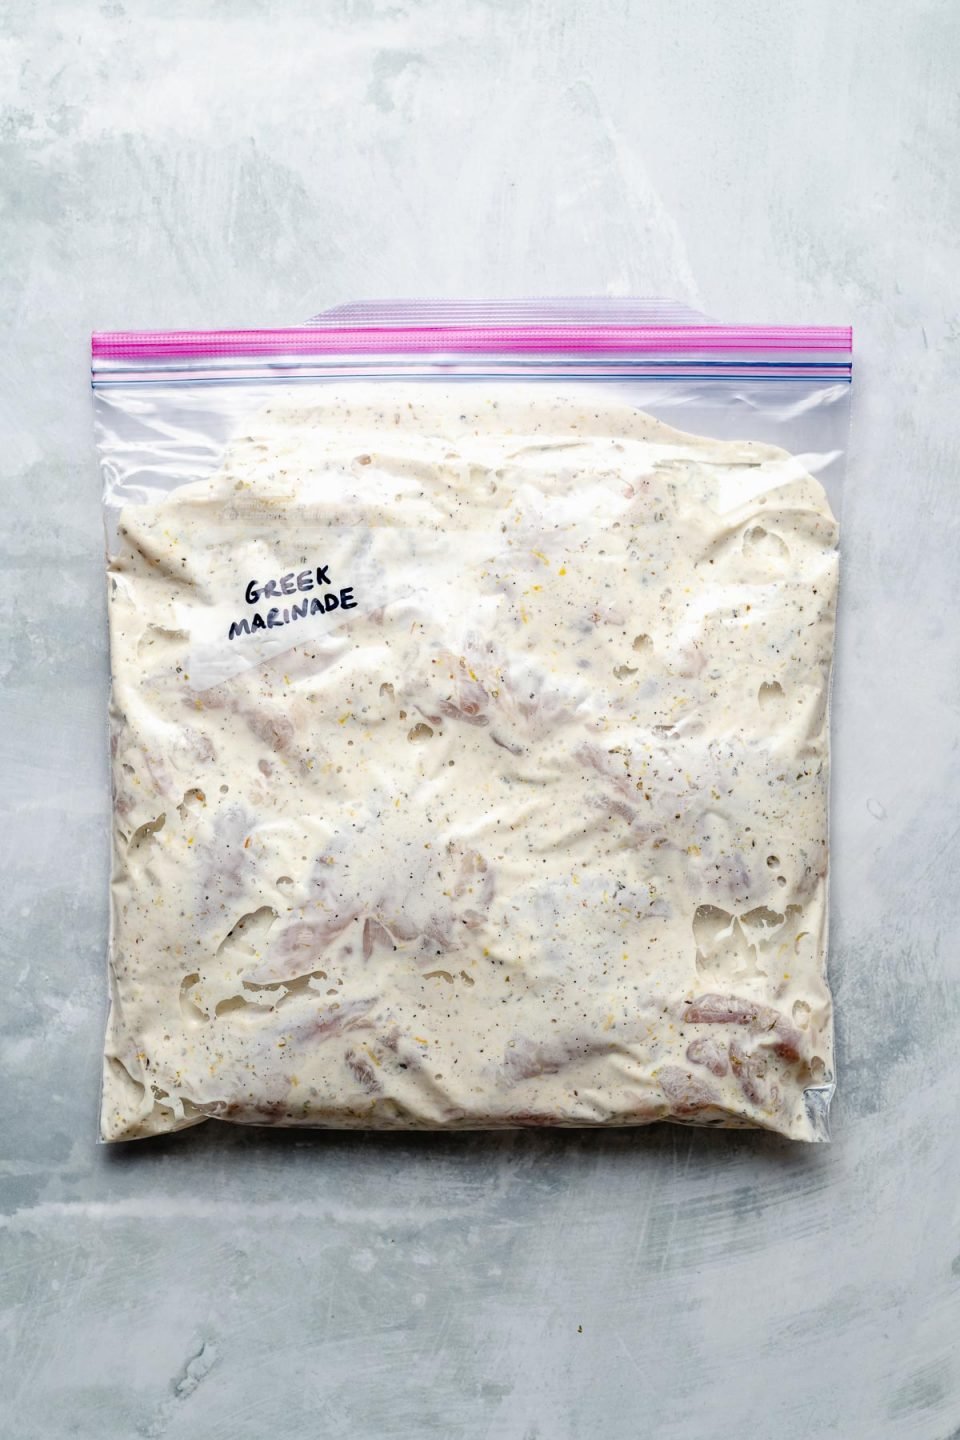 Chicken thighs in a Ziploc bag, marinating in Greek marinade. The bag sits atop a light blue surface. “Greek Marinade" is penned in the bag's memo area.